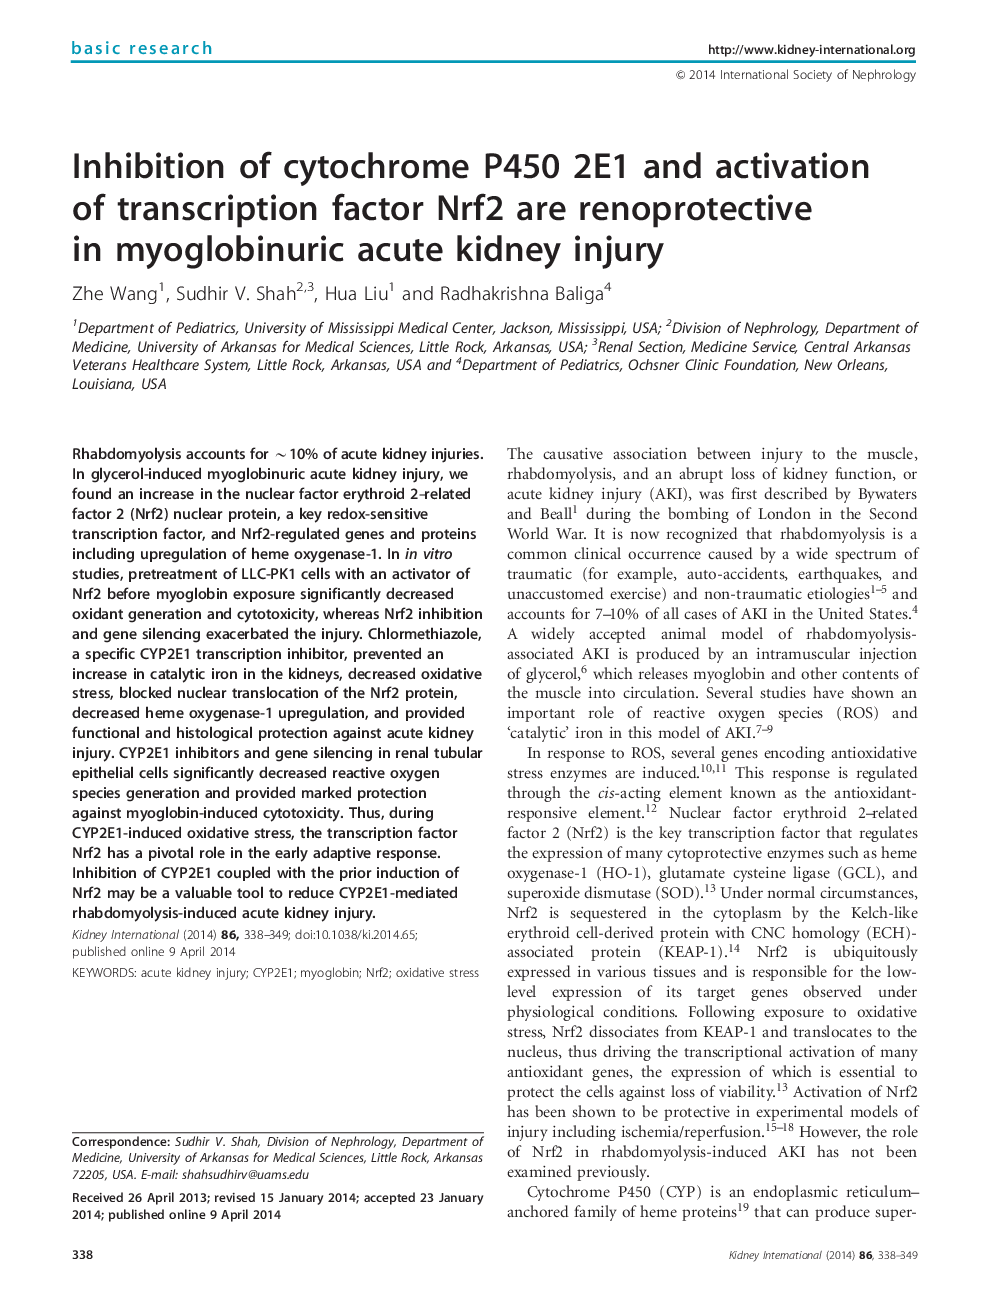 Inhibition of cytochrome P450 2E1 and activation of transcription factor Nrf2 are renoprotective in myoglobinuric acute kidney injury